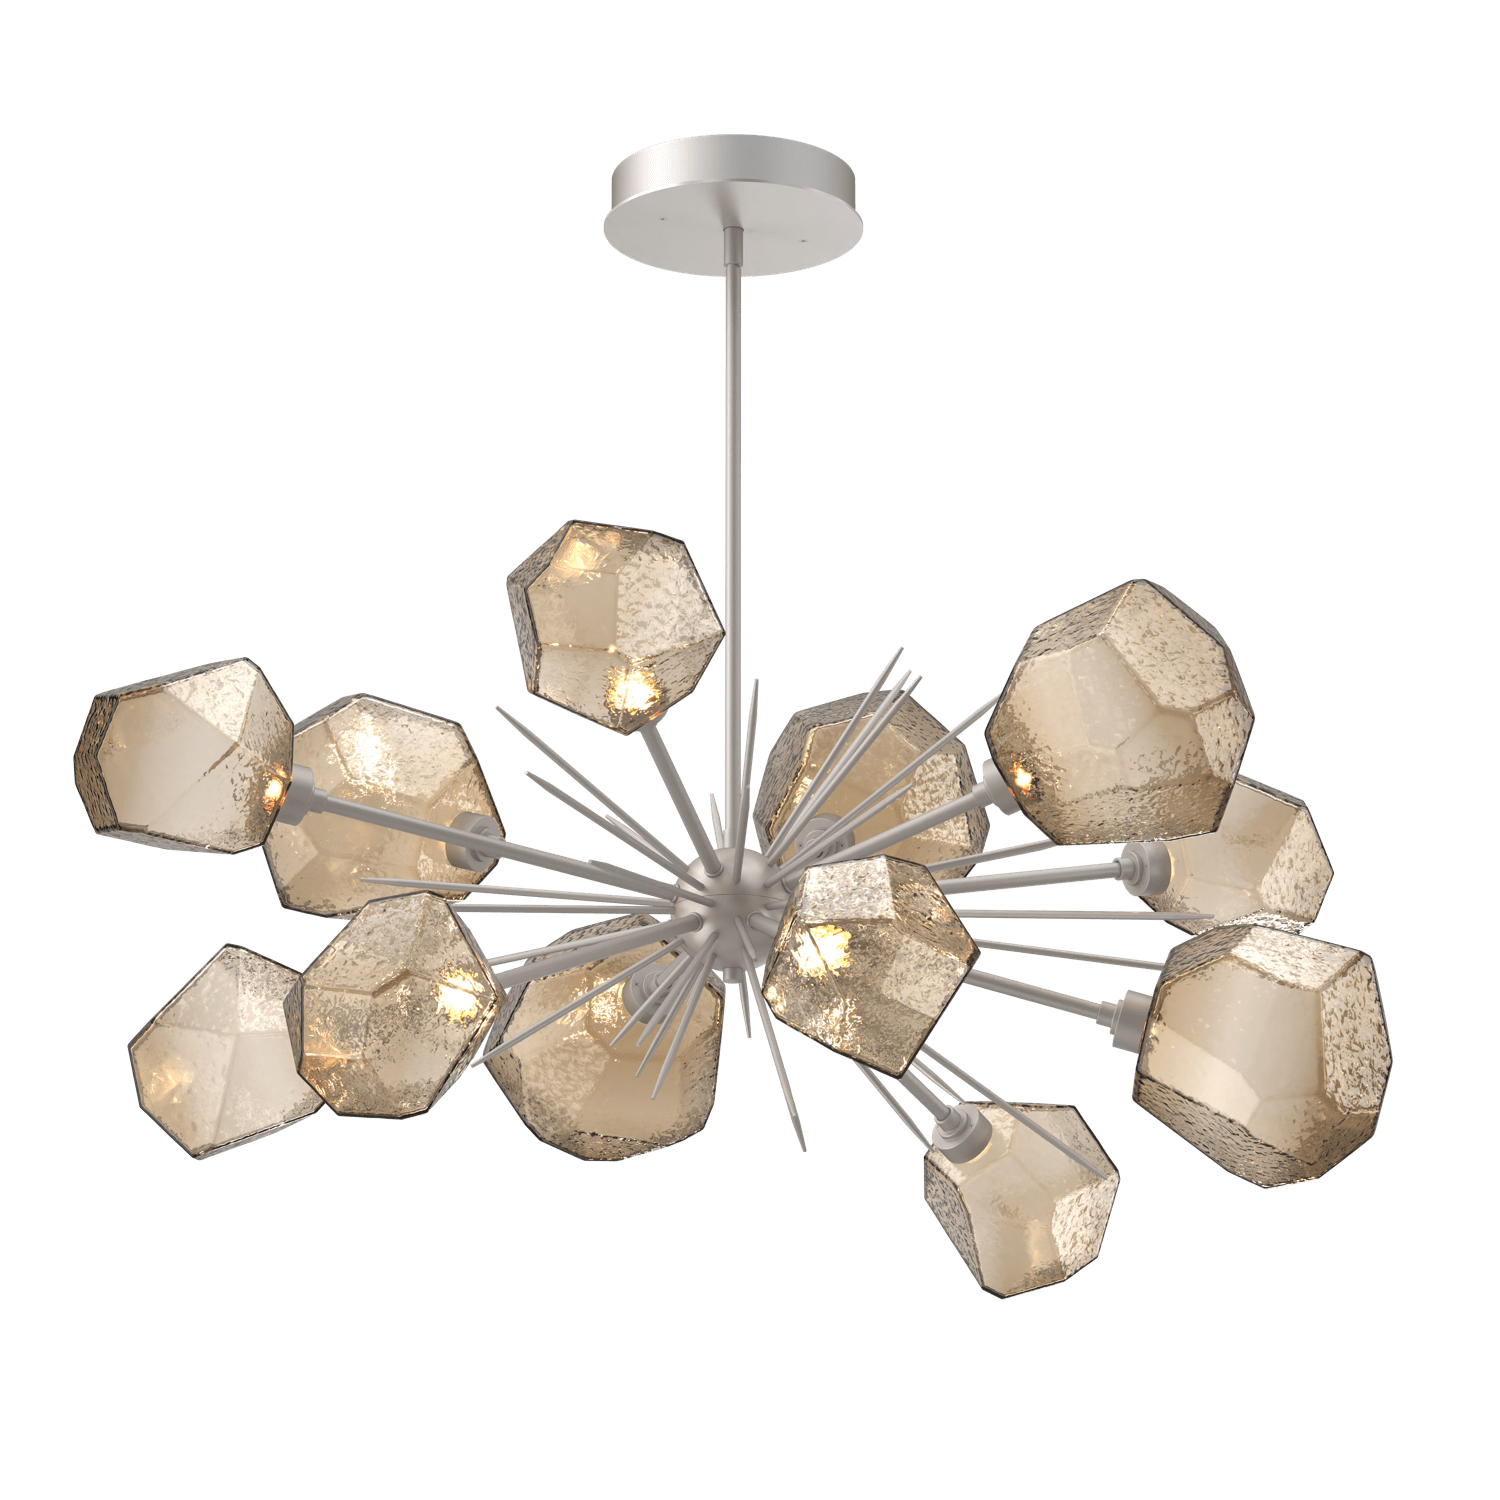 PLB0039-0D-BS-B-Hammerton-Studio-Gem-43-inch-oval-starburst-chandelier-with-metallic-beige-silver-finish-and-bronze-blown-glass-shades-and-LED-lamping